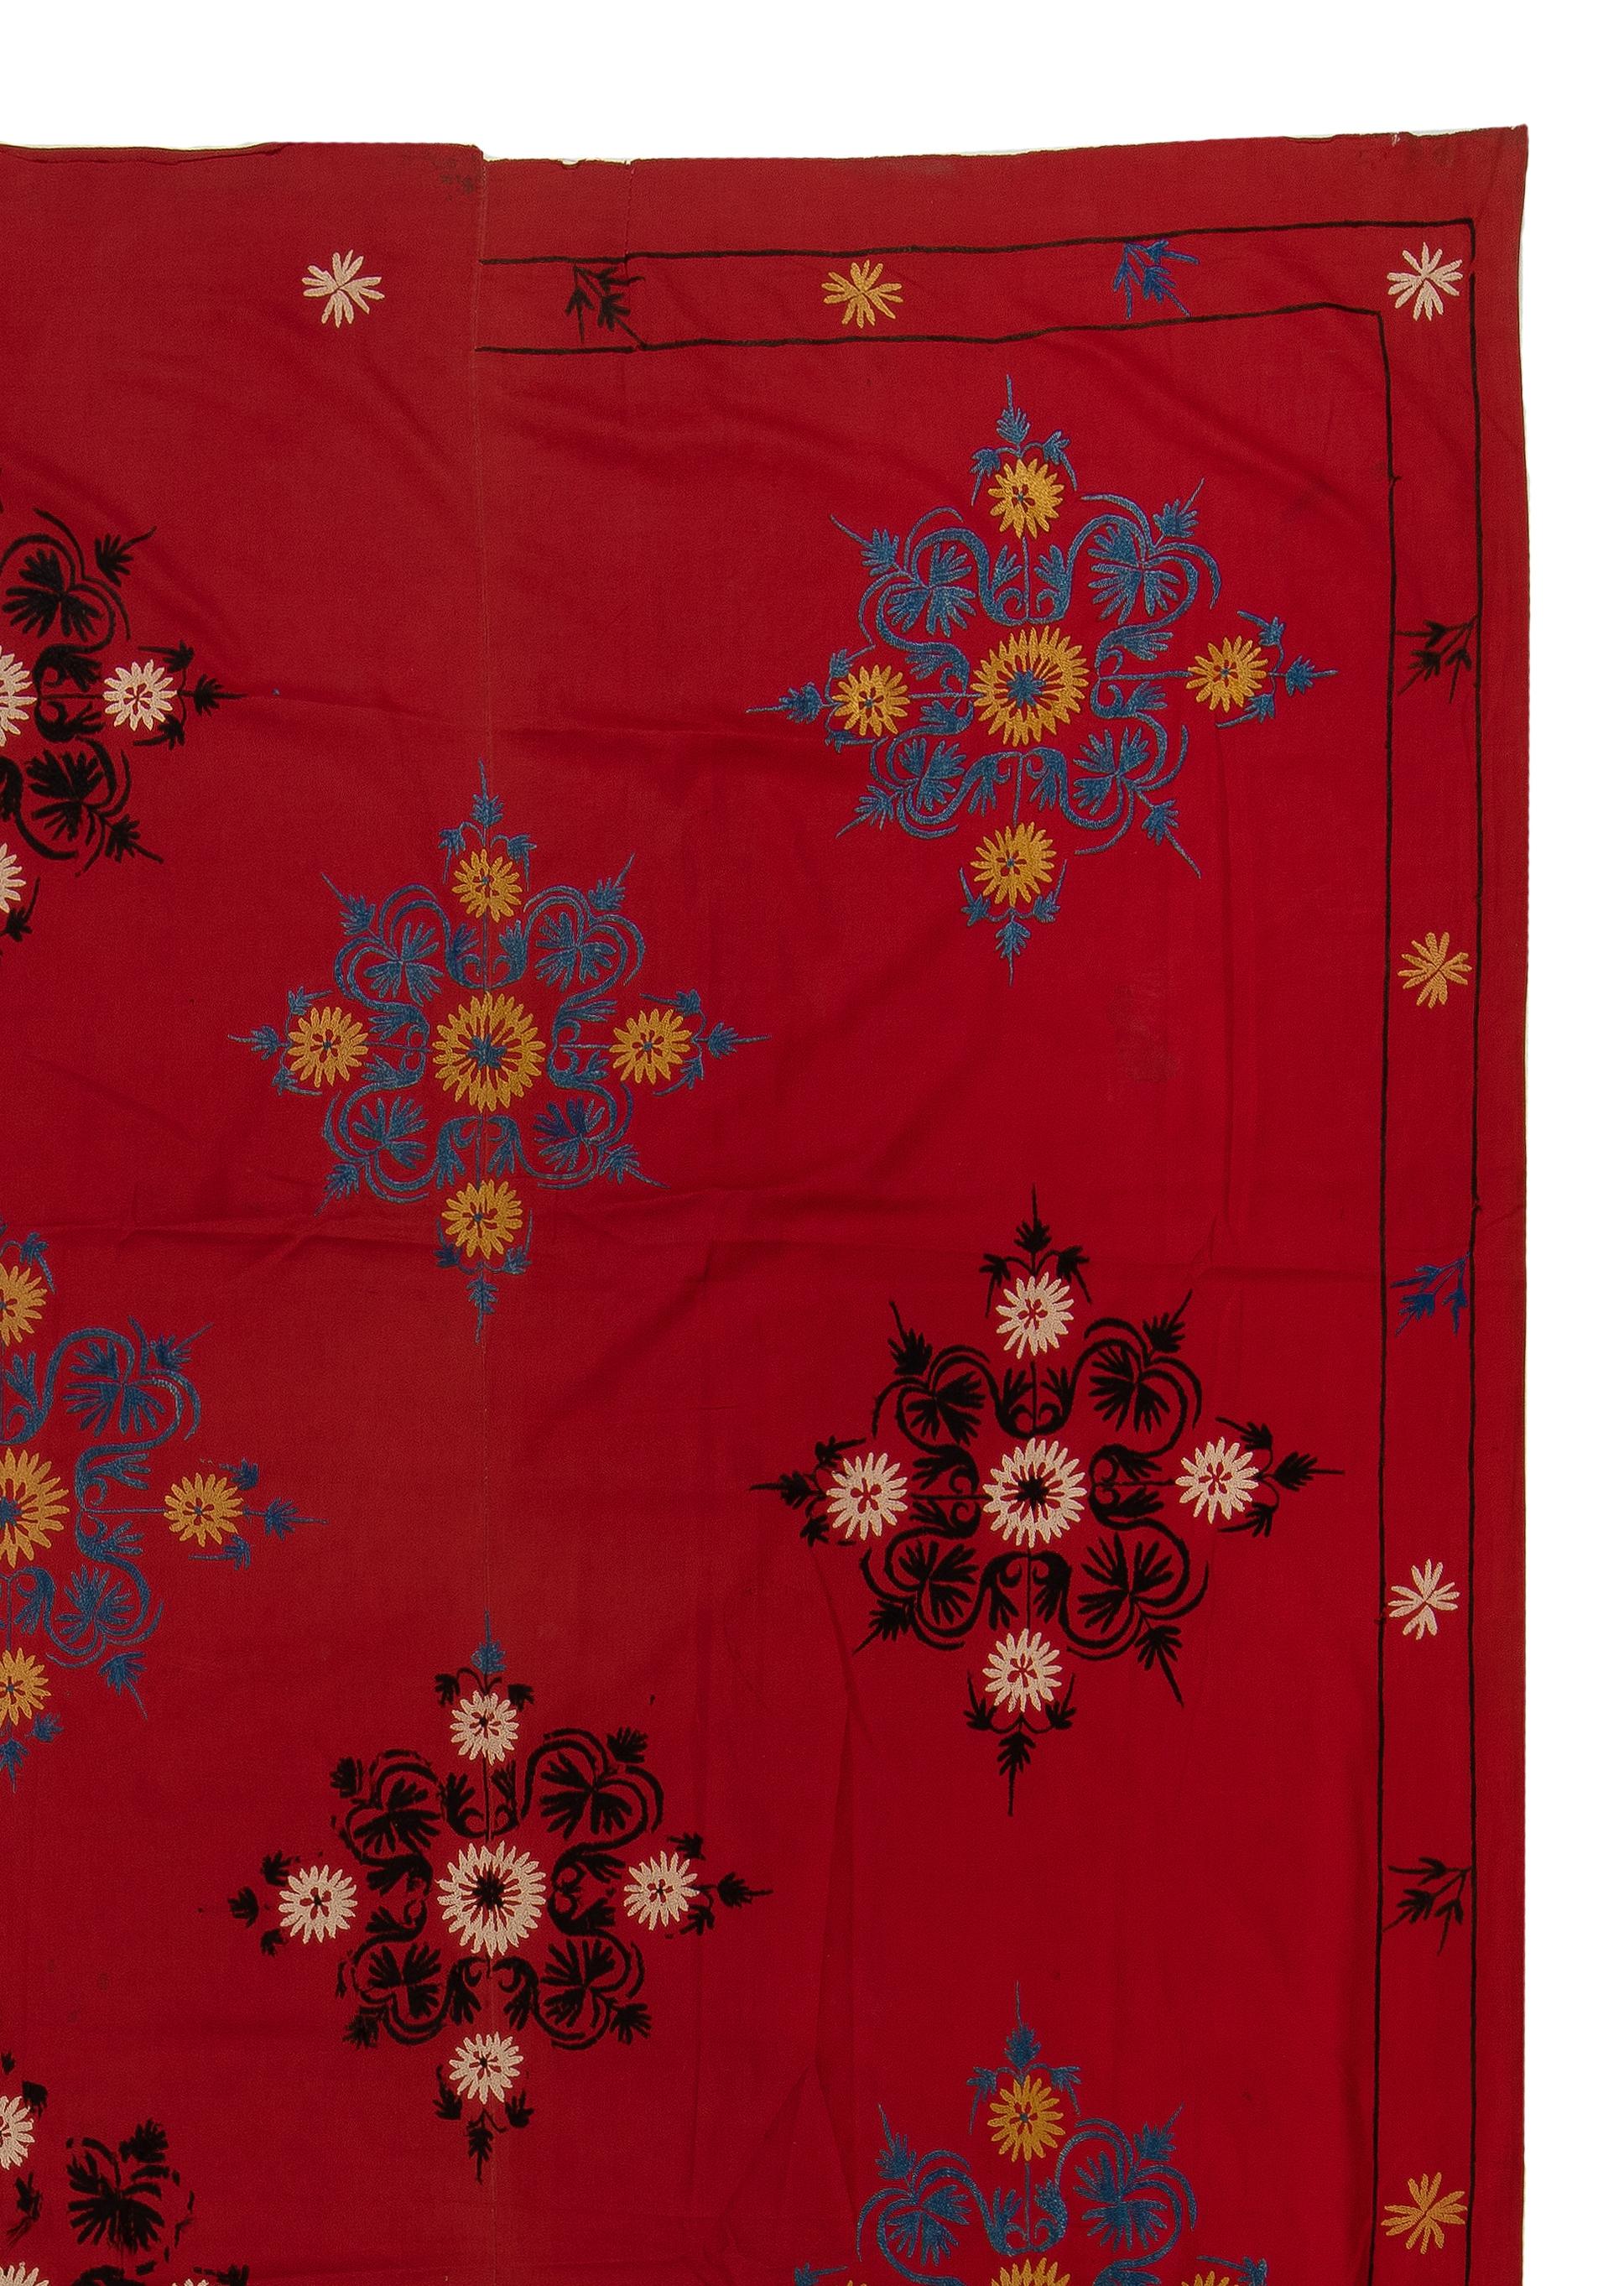 Uzbek 6.7x8.7 Ft Hand Embroidered Silk Wall Hanging, Red Bedspread, Suzani Tablecloth For Sale